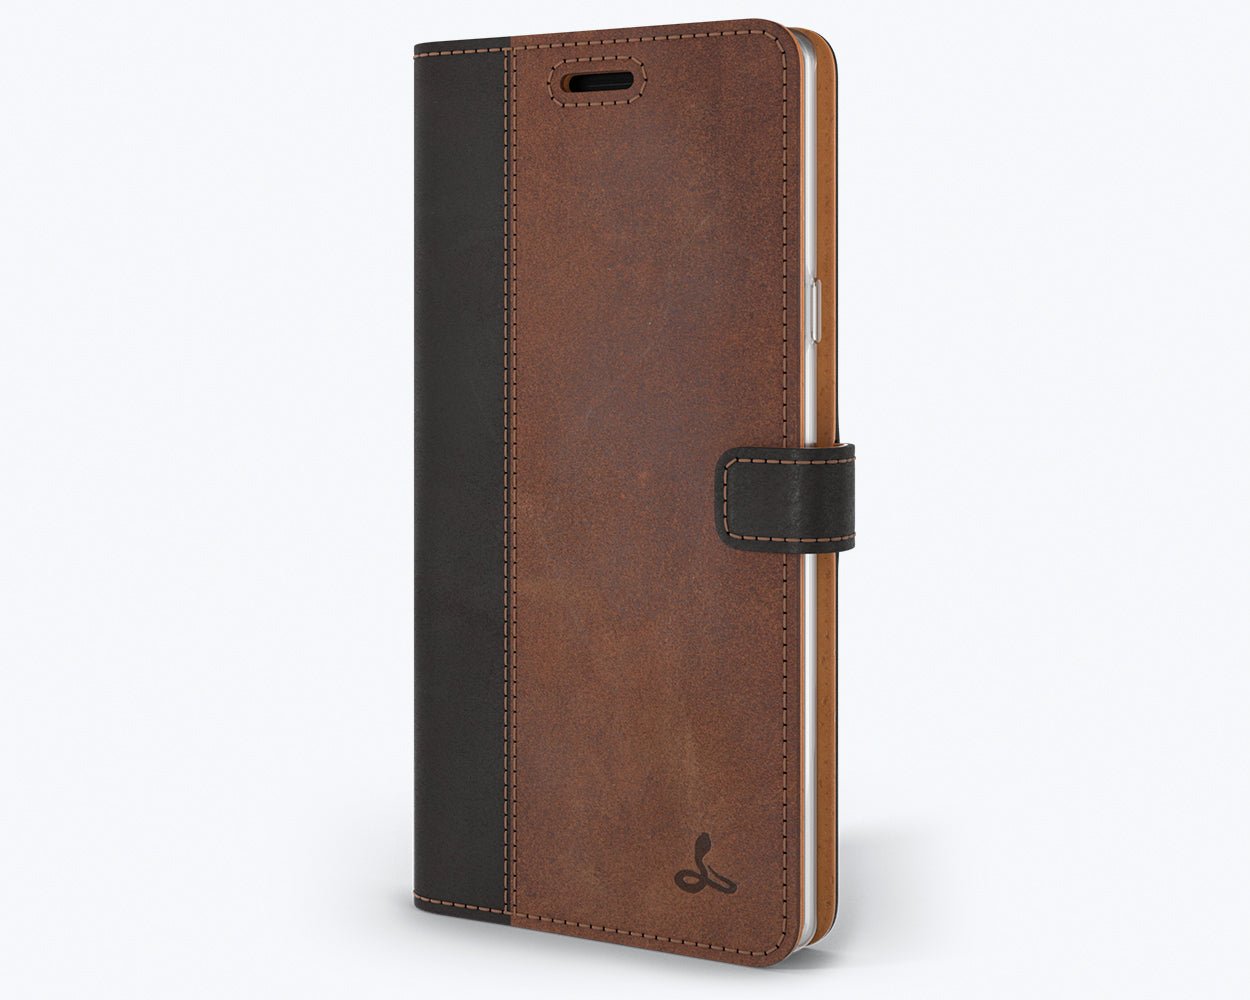 Vintage Two Tone Leather Wallet - Samsung Galaxy Note 9 (Almost Perfect) TT Black/Brown Samsung Galaxy Note 9 - Snakehive UK